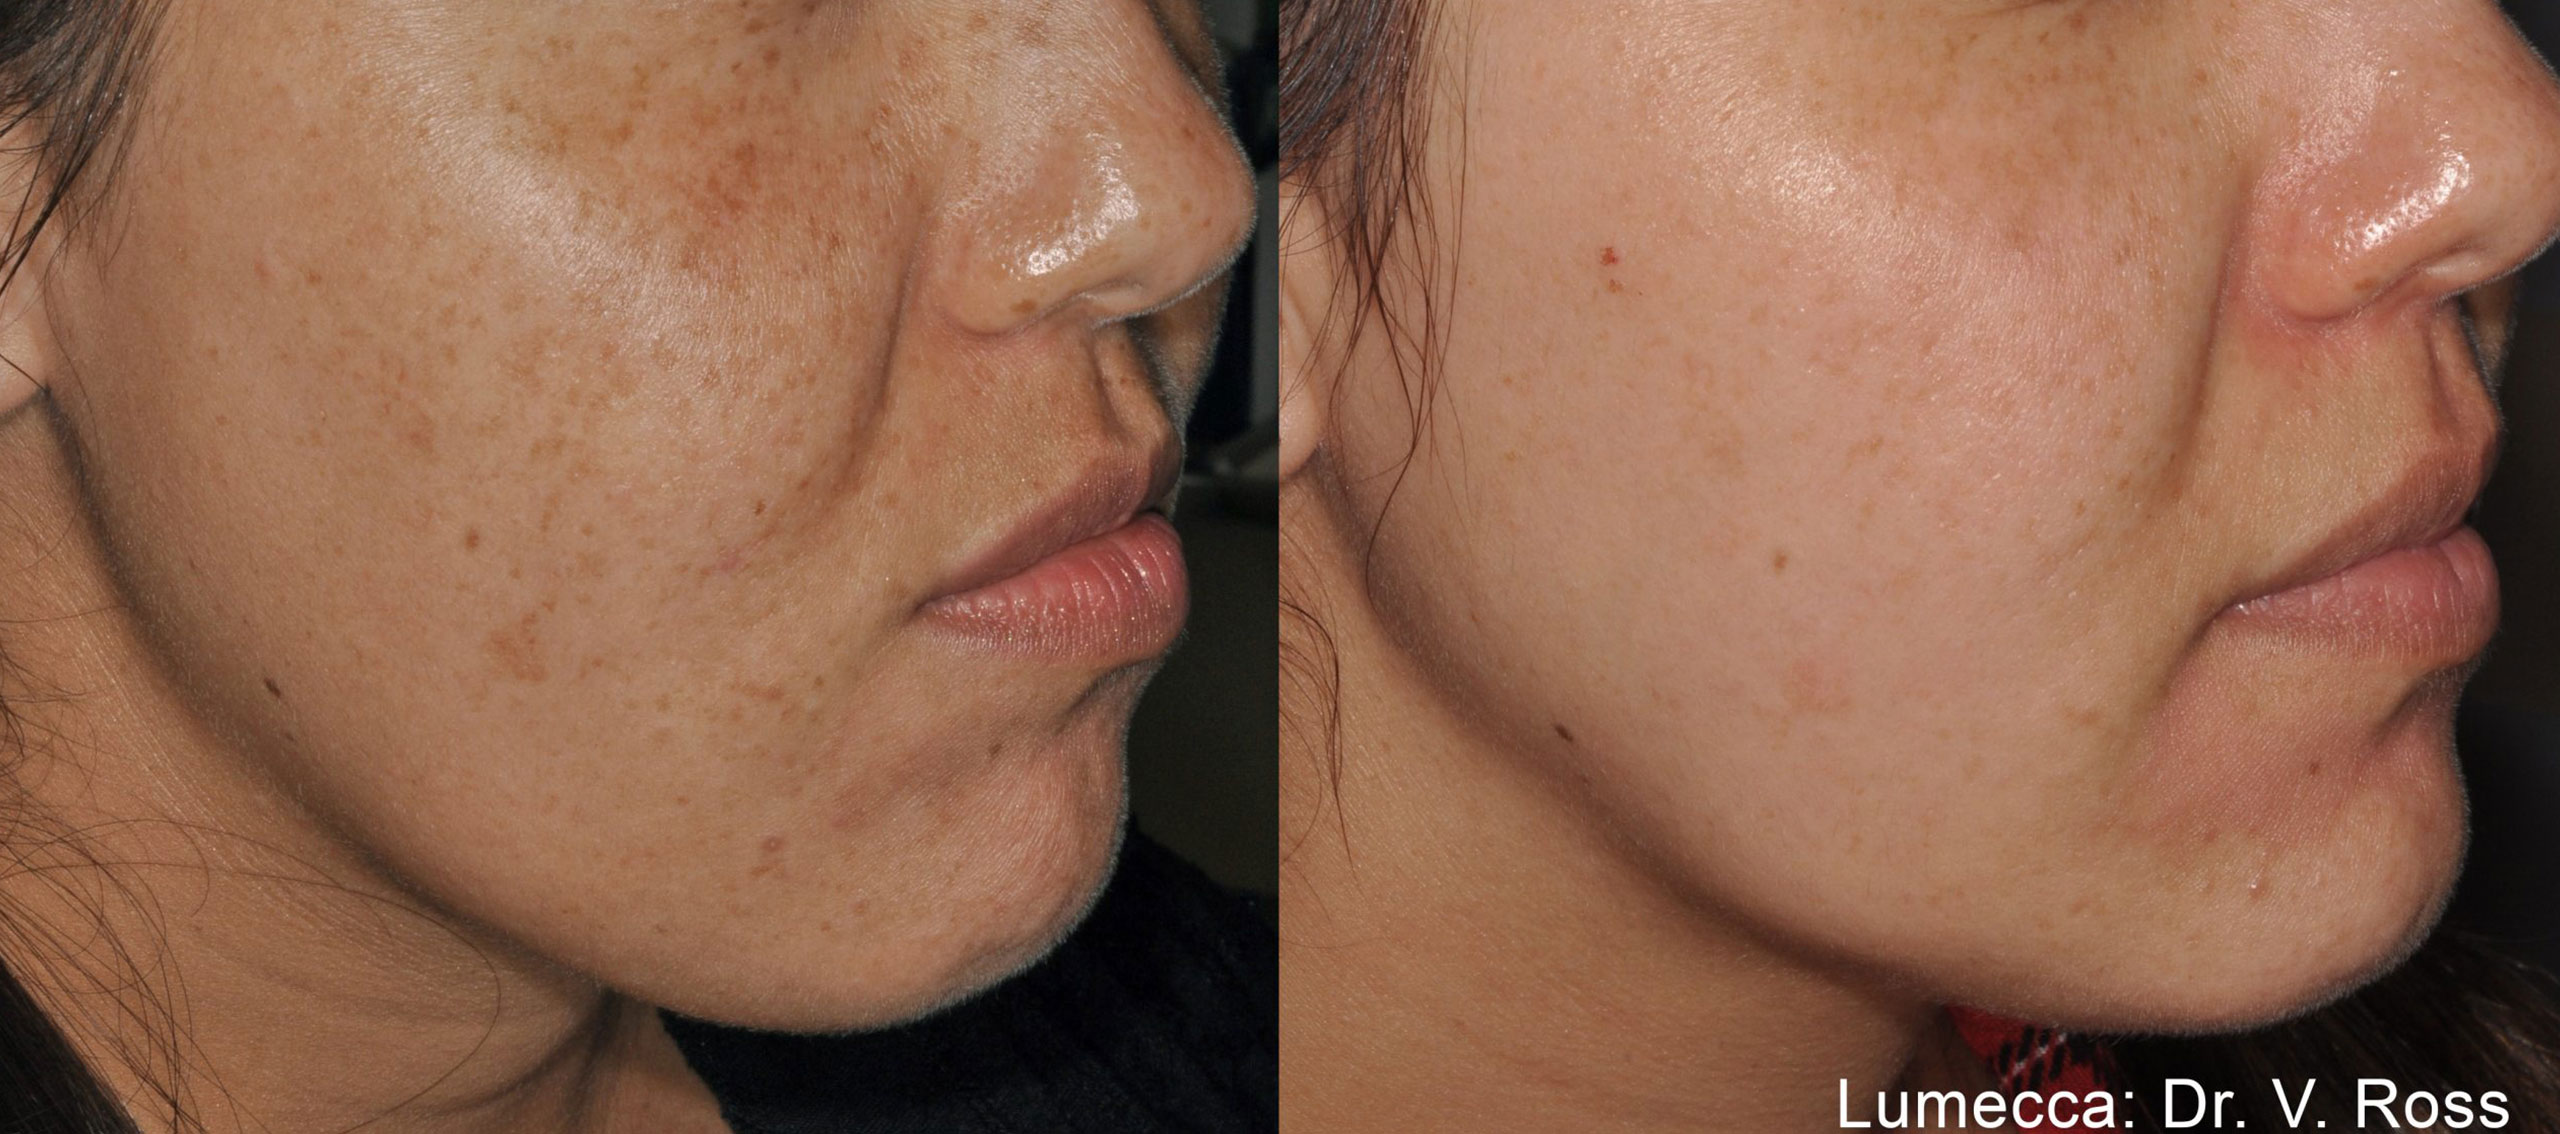 lumecca-before-after-dr-h-roberts-preview-9